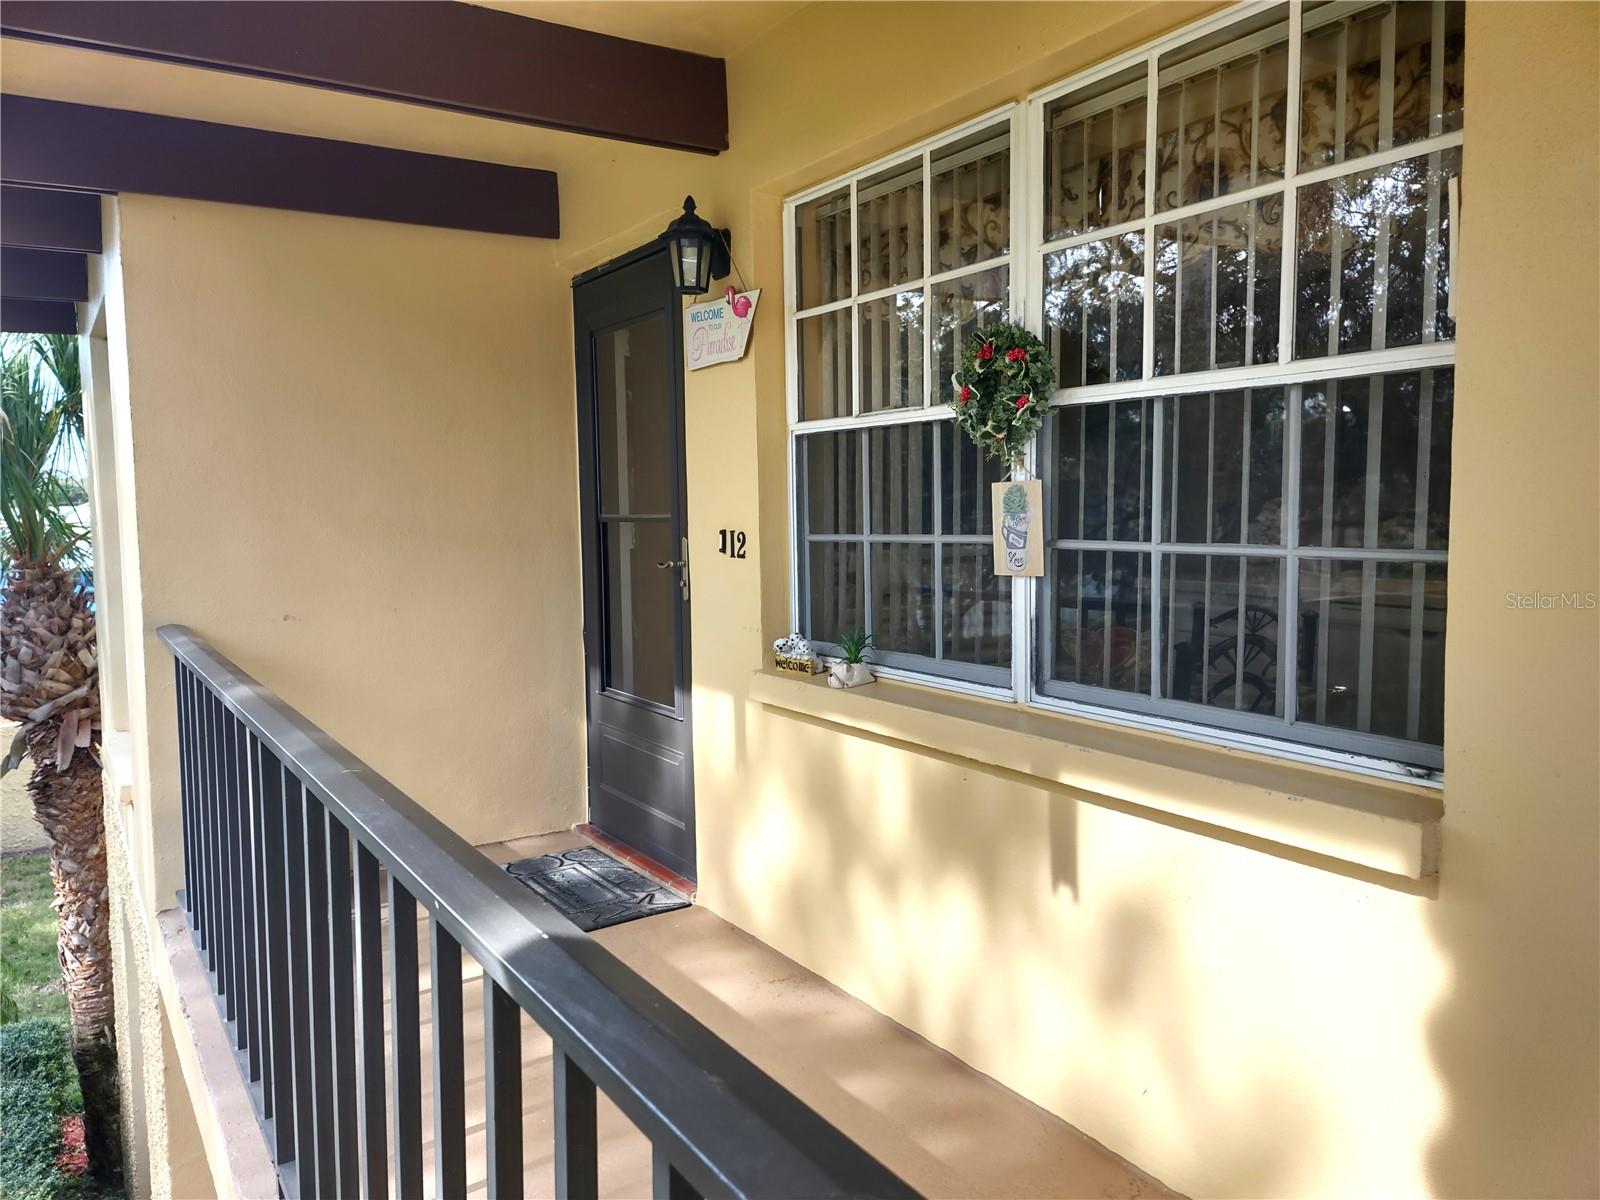 Private porch area to enjoy a scenic view of the community!